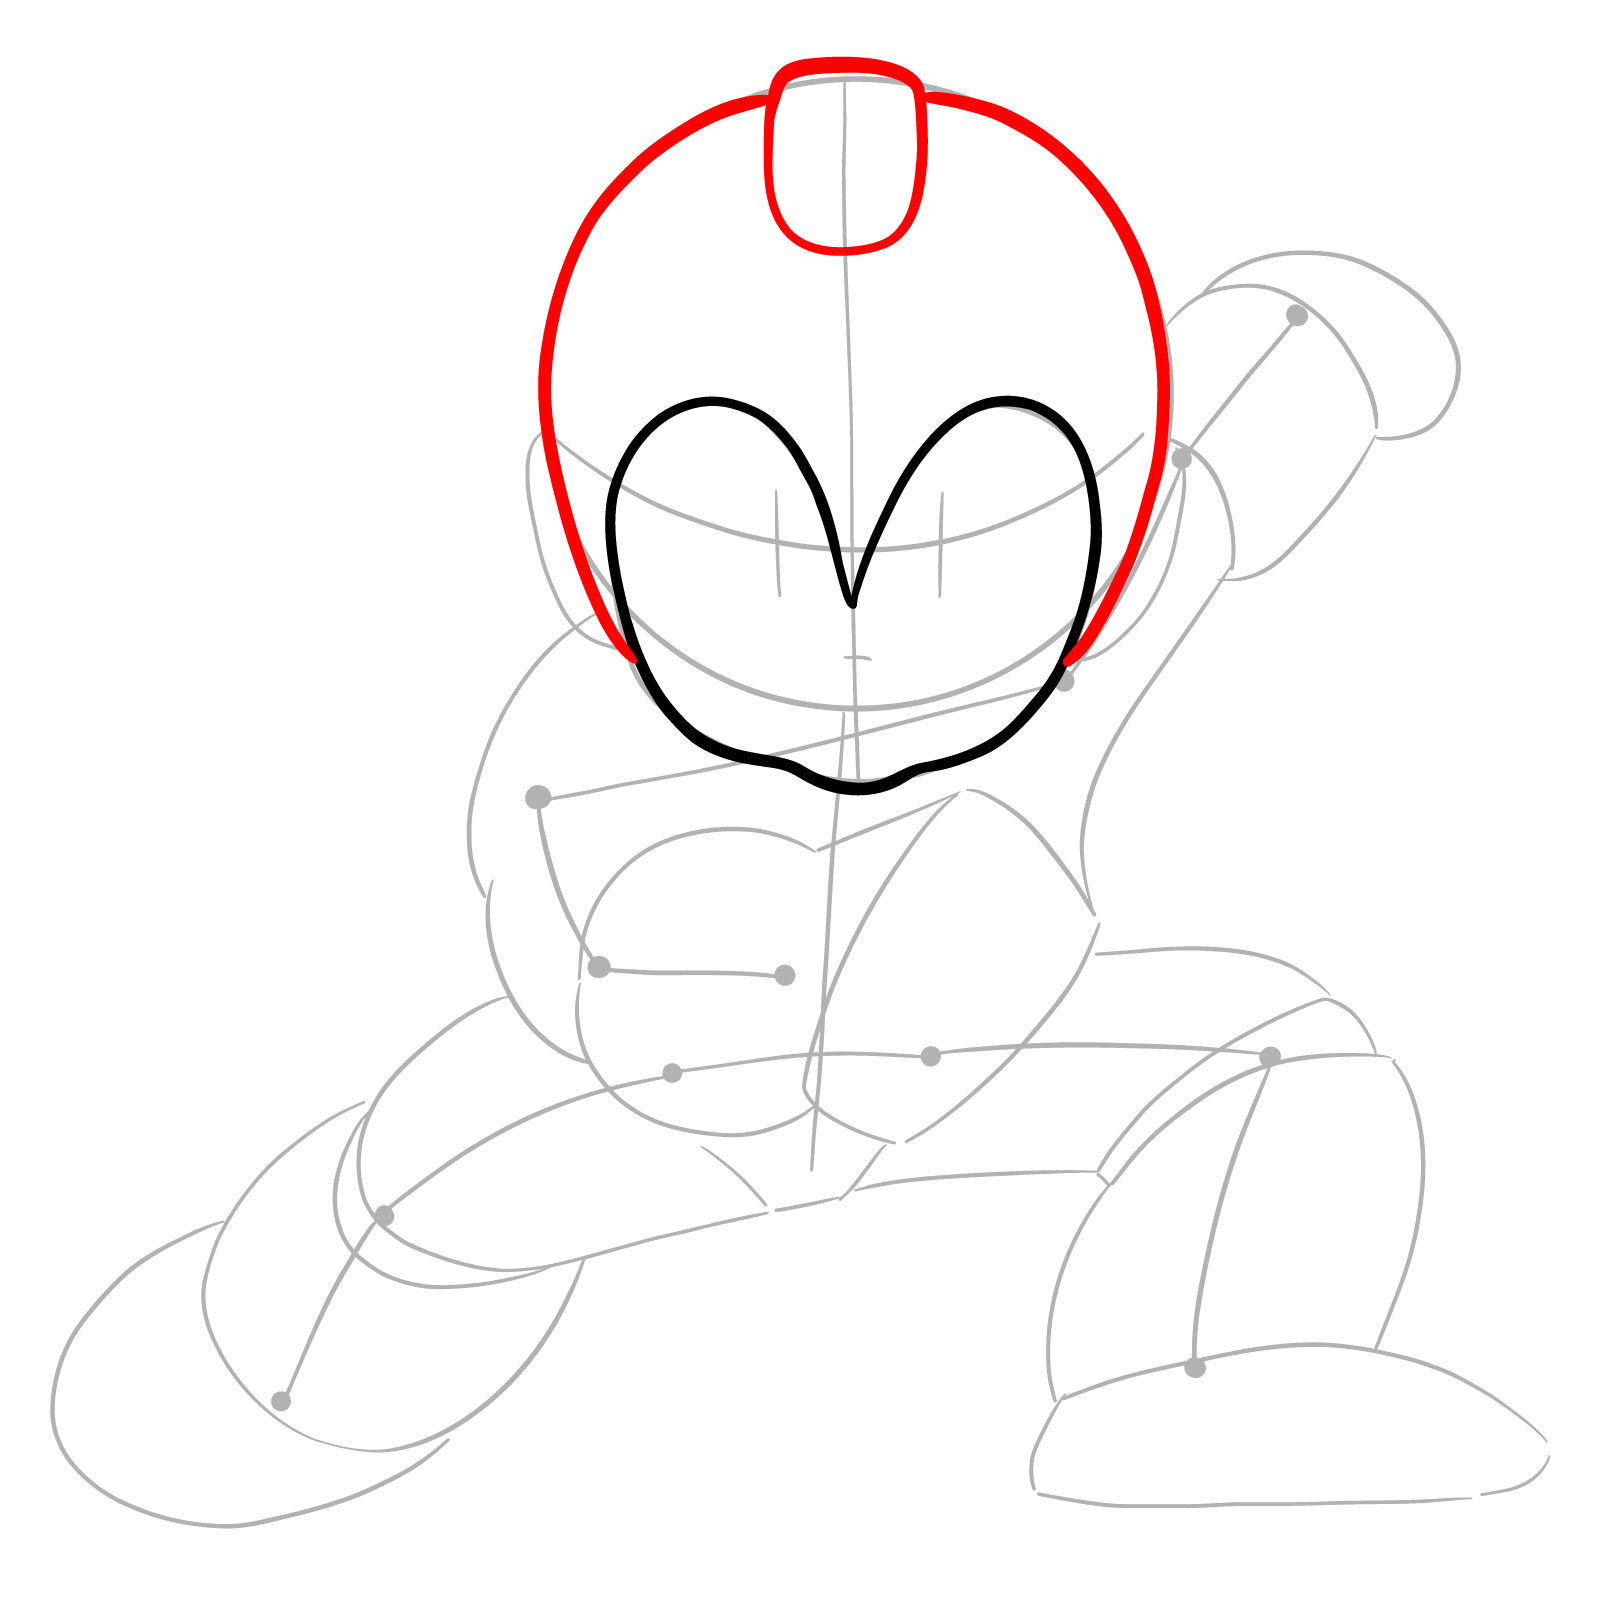 How to draw Mega Man from the original game - step 05